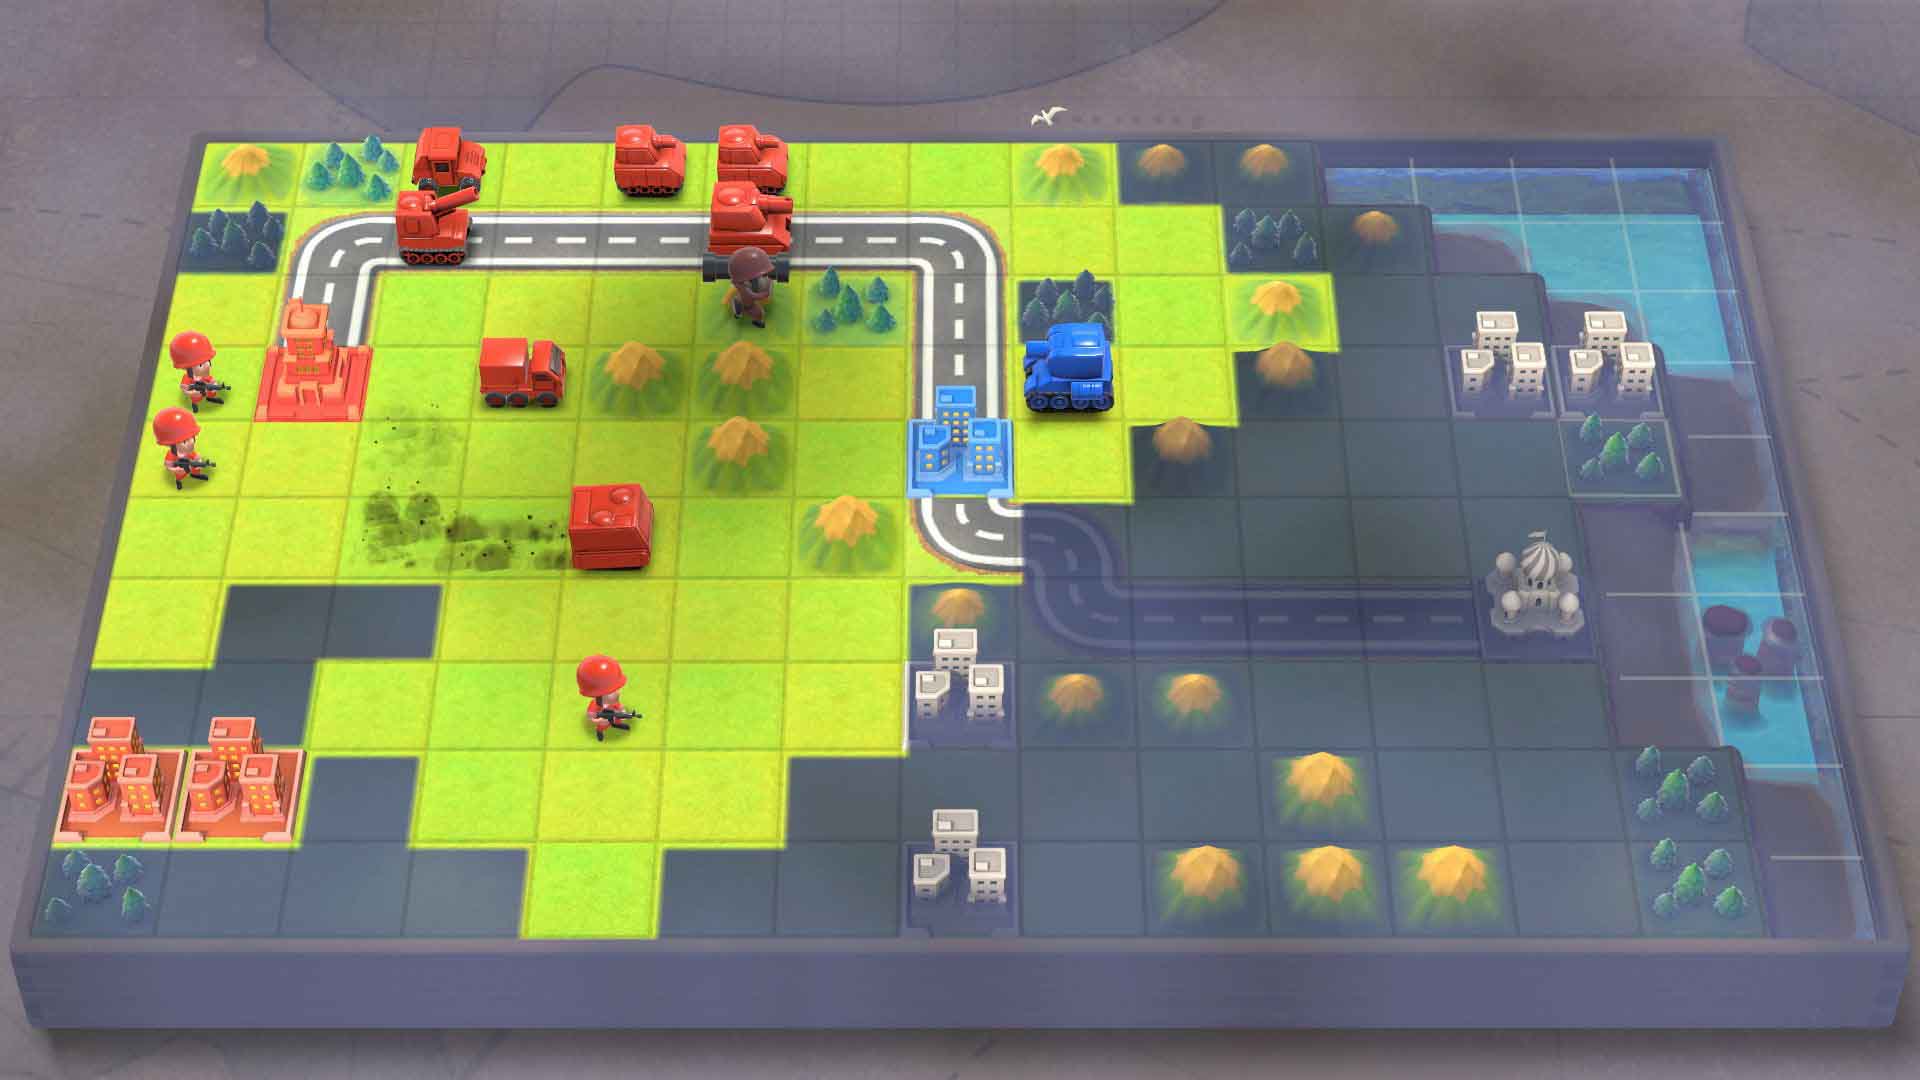 Advance Wars 1+2: Re-boot Camp is a faithful remake so far | Hands-on preview